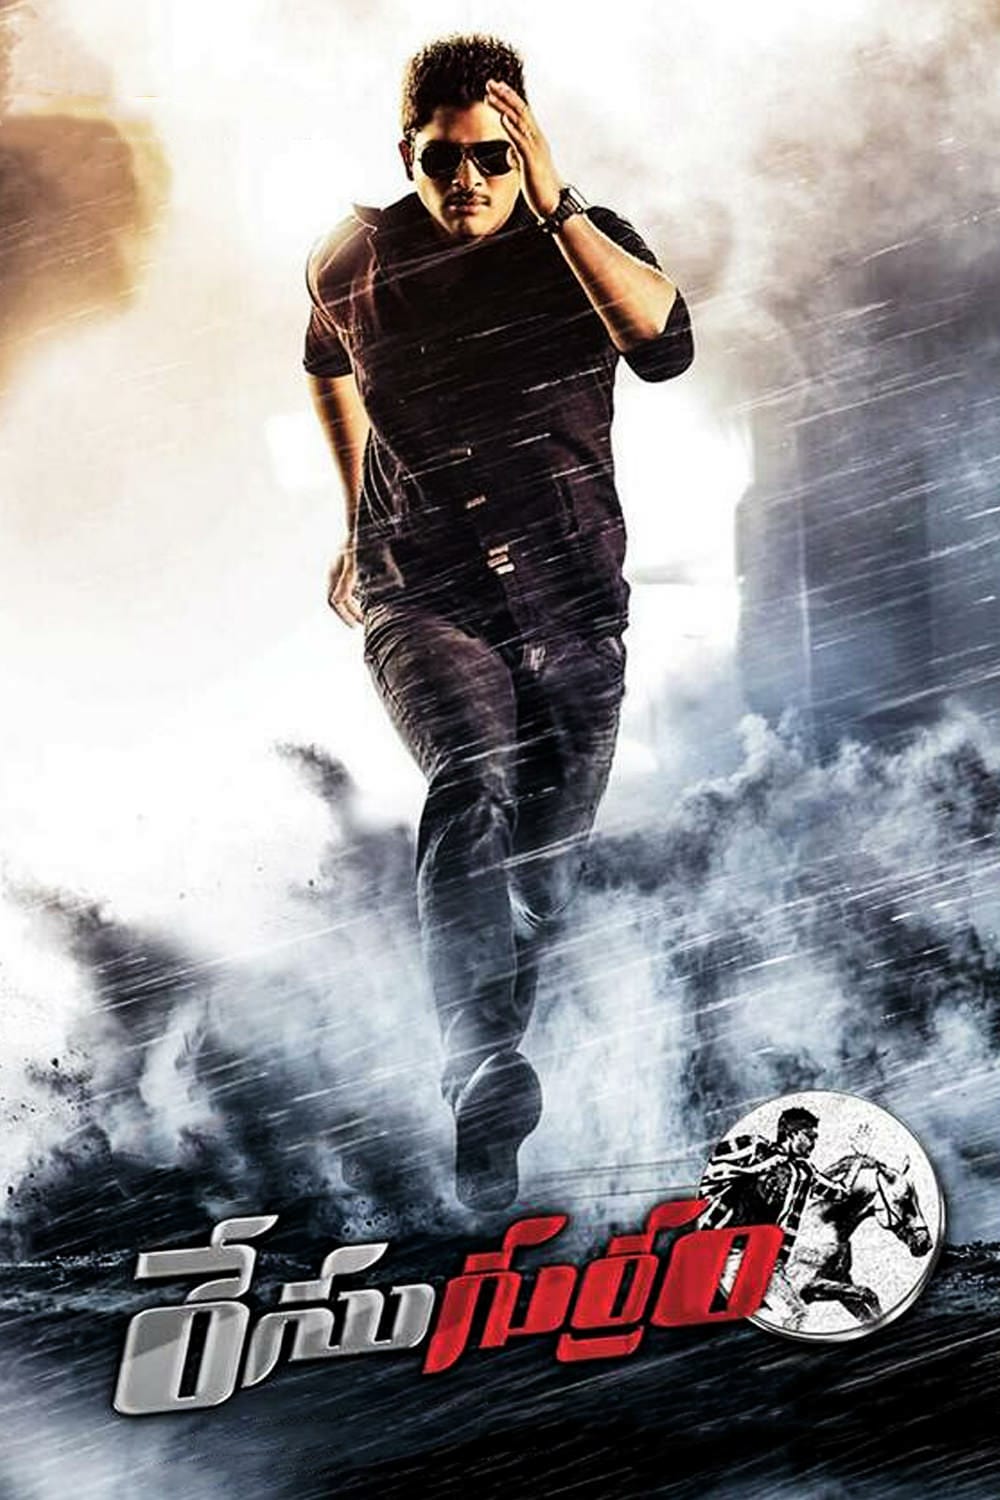 Poster for the movie "Race Gurram"